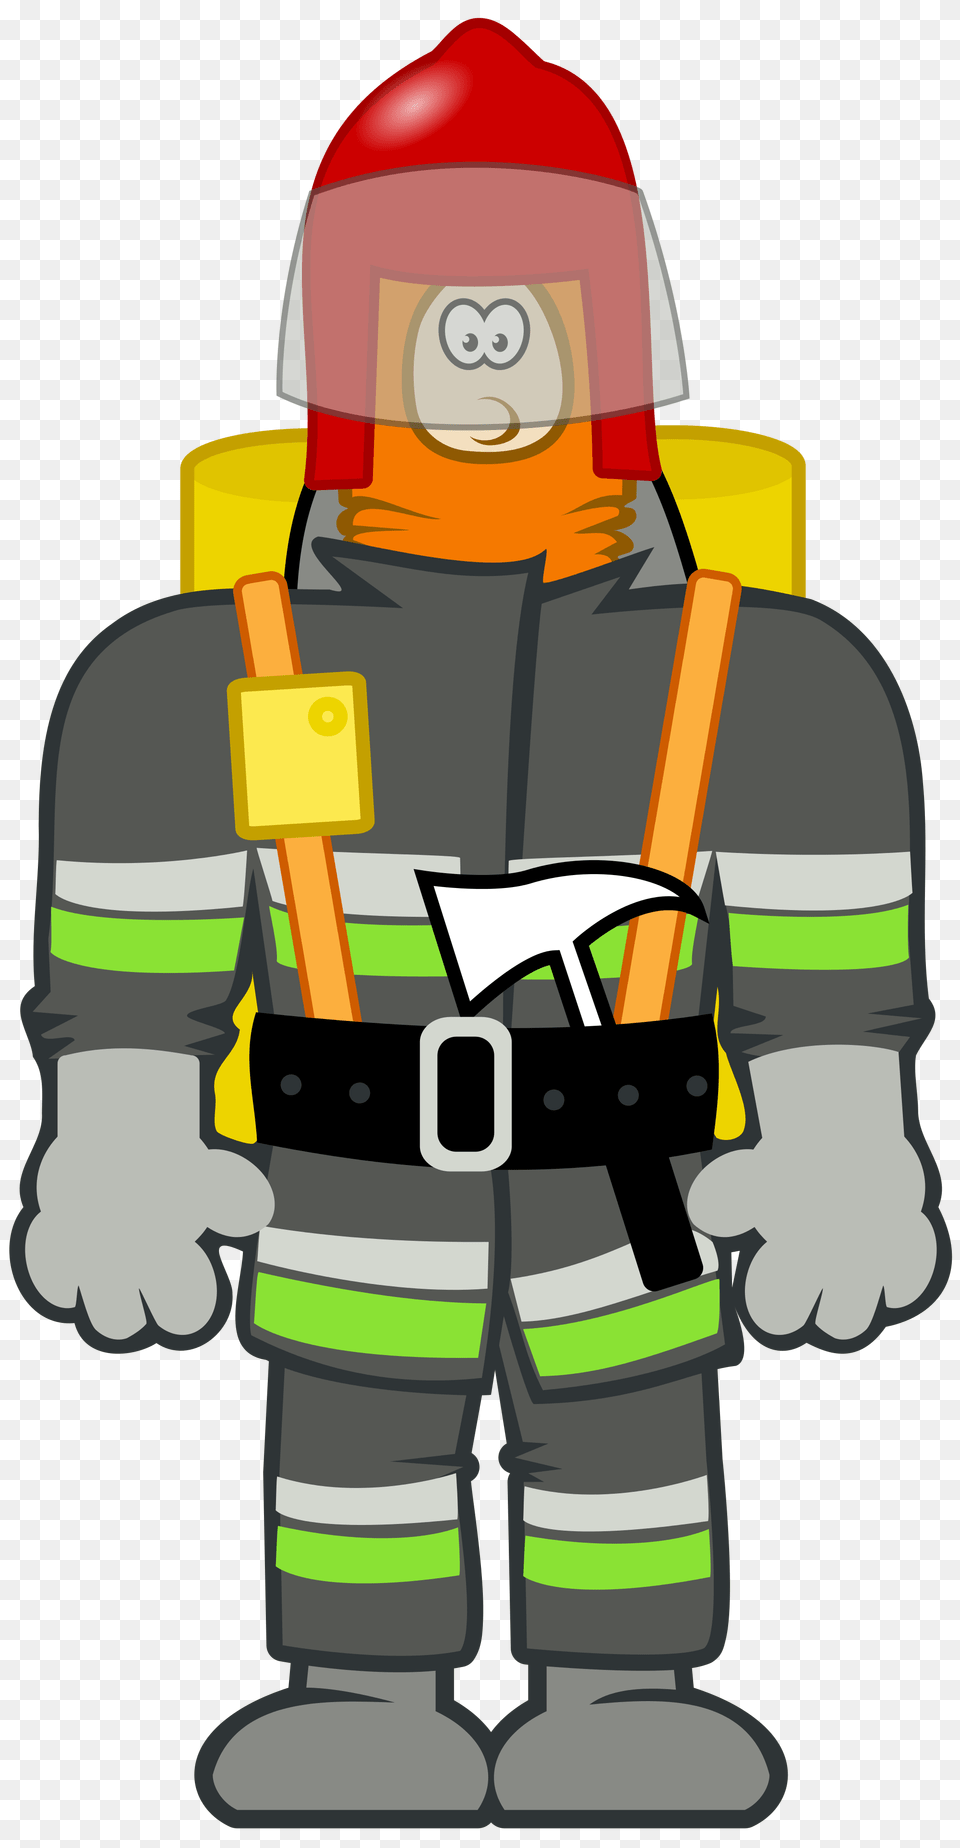 Fireman Dressed For Action, Hardhat, Helmet, Clothing, Accessories Png Image